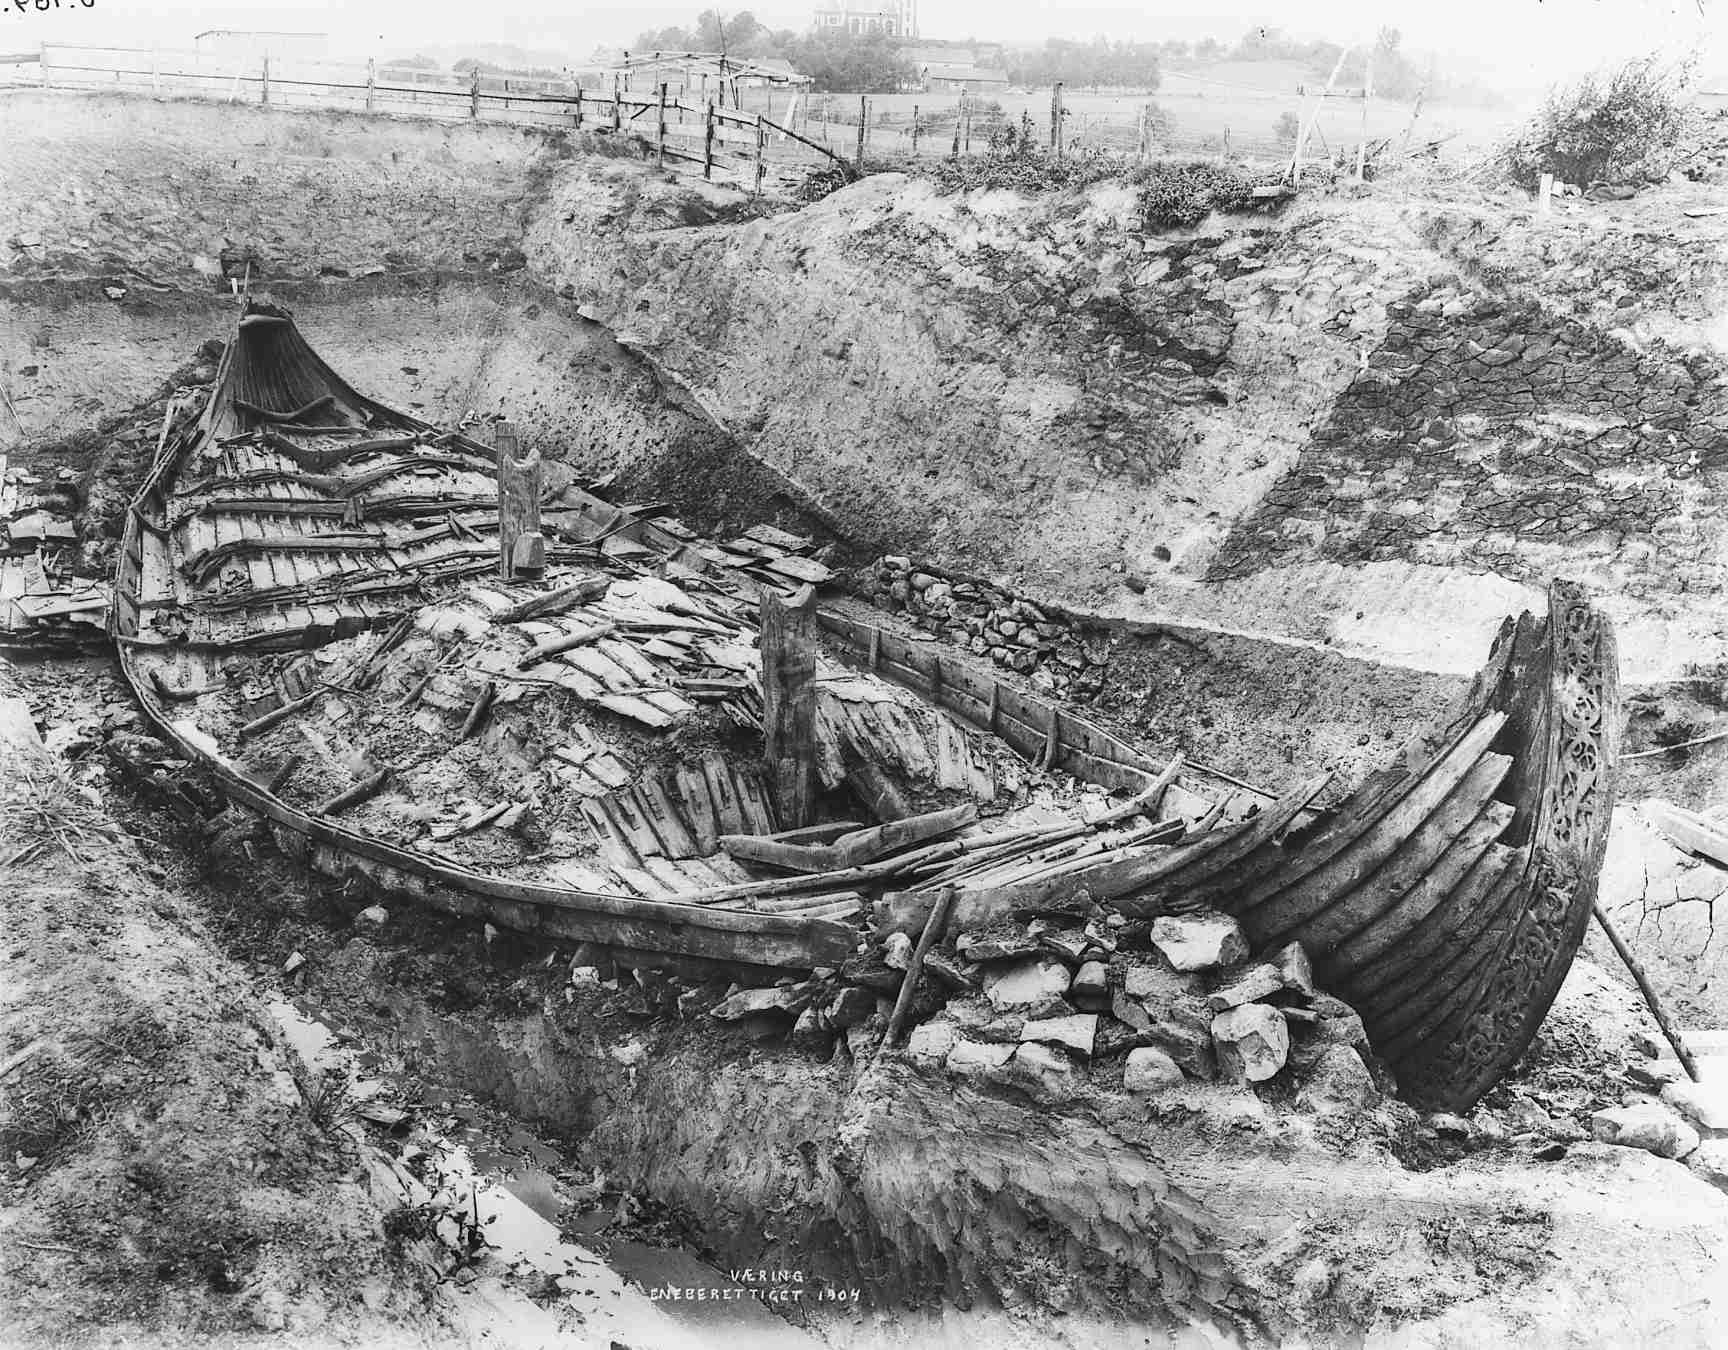 From the archaeological excavations of the Oseberg burial mound near Tønsberg (100 km southwest of Oslo, Norway) in 1904. The find consisted of a Viking ship (the Oseberg Ship), numerous wooden and metal artefacts, textiles and even sacrificed animals used as offerings to the two buried women.